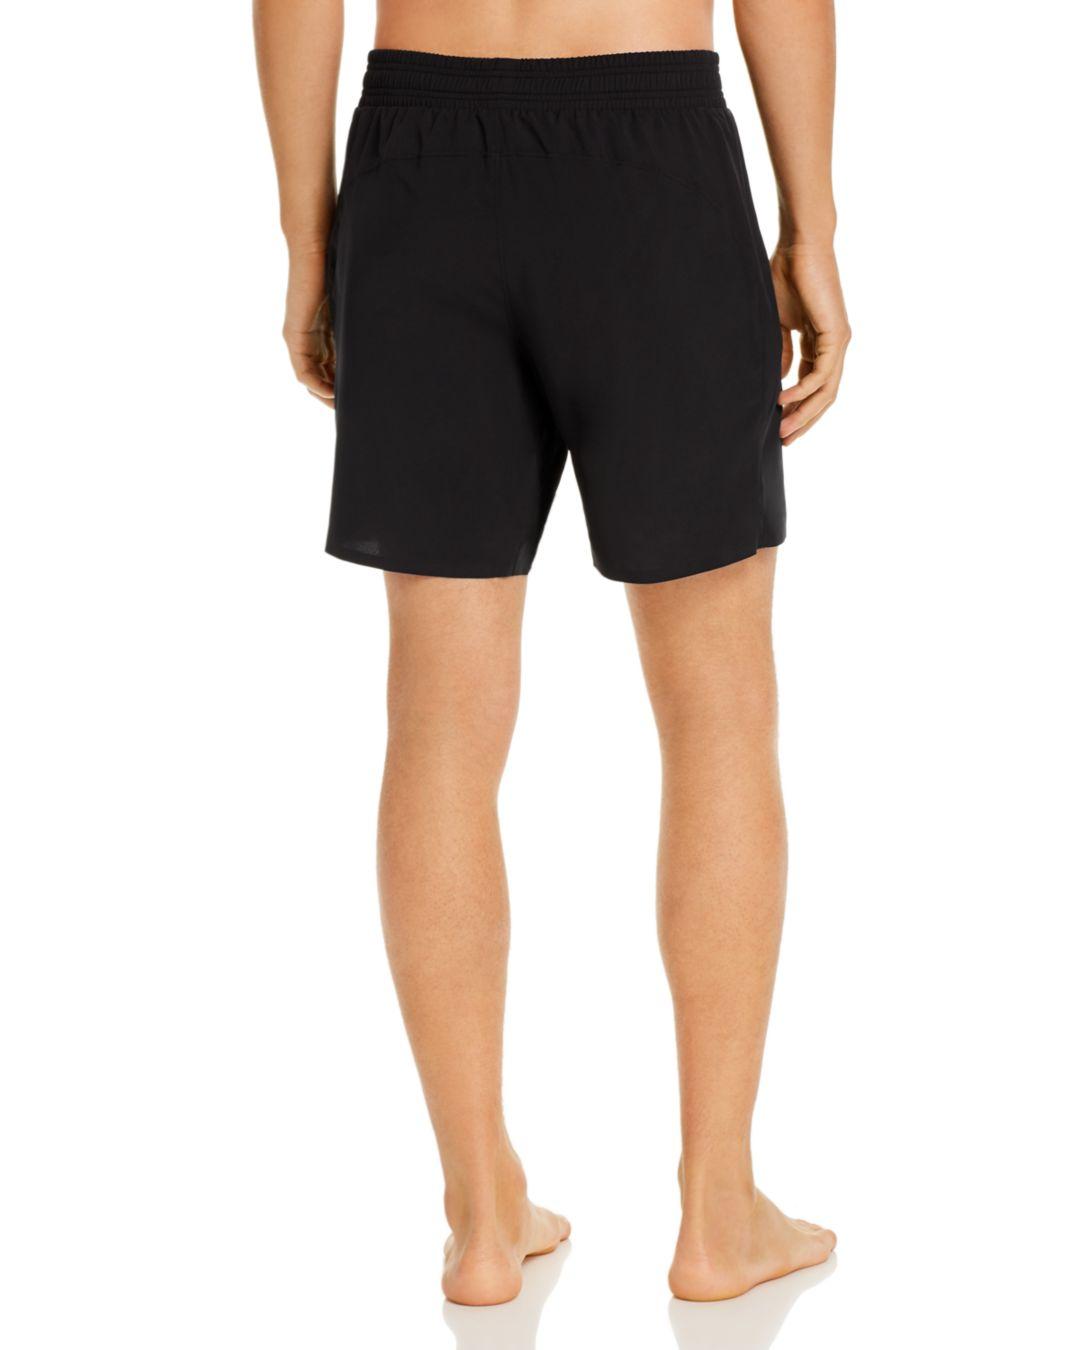 Alo Yoga Synthetic Advance 2 - In - 1 Shorts in Black for Men - Lyst